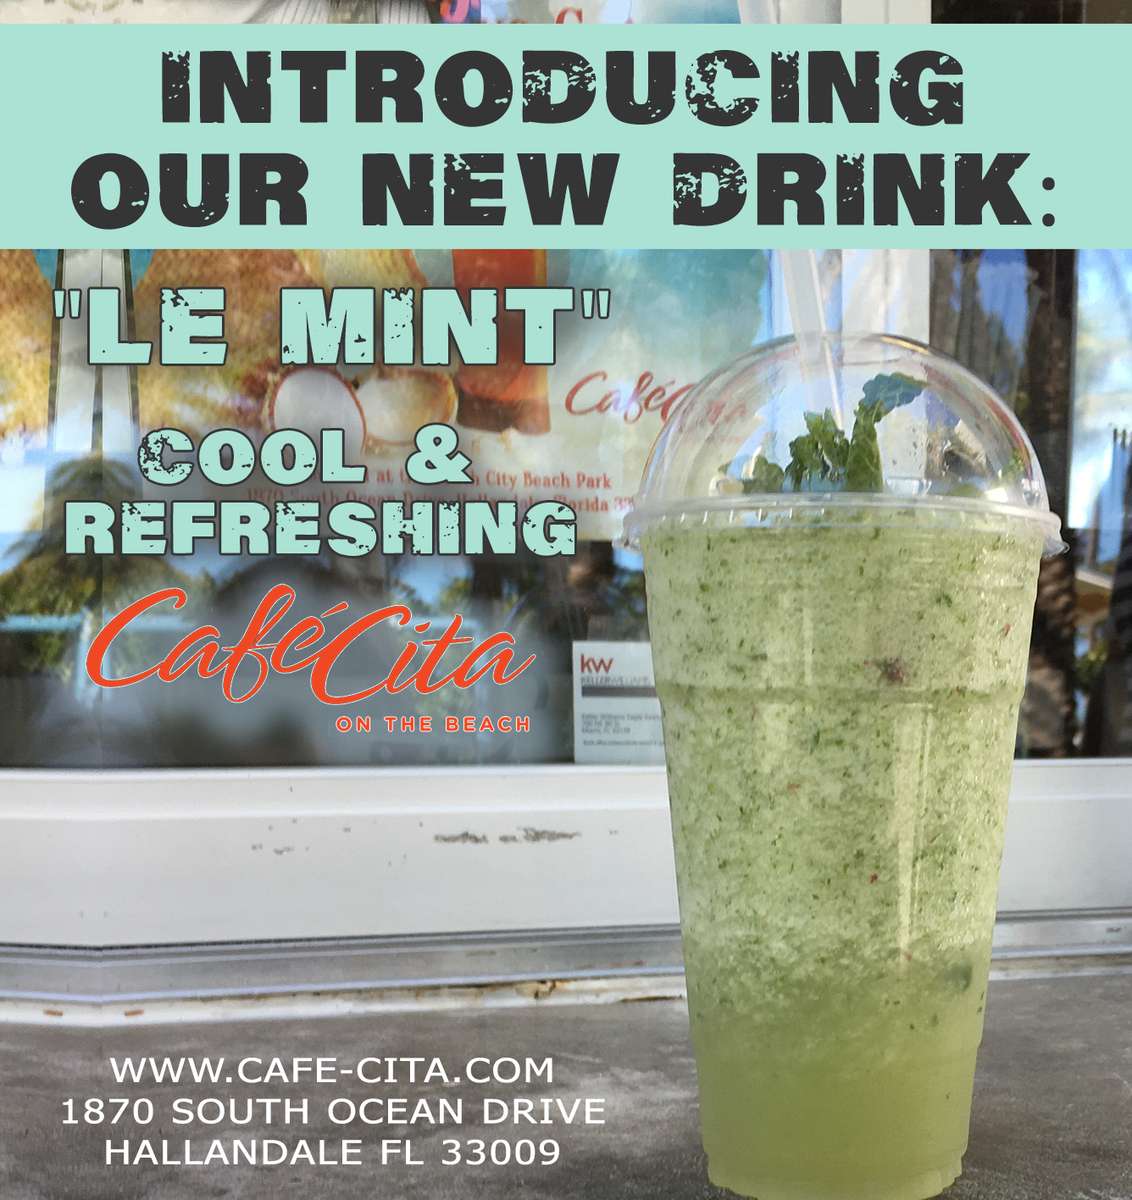 introducing our new drink: "le mint" cool & refreshing. Cafe City On the beach. www.cafe-cita.com . 1870 south ocean drive, hallandale, fl, 33009